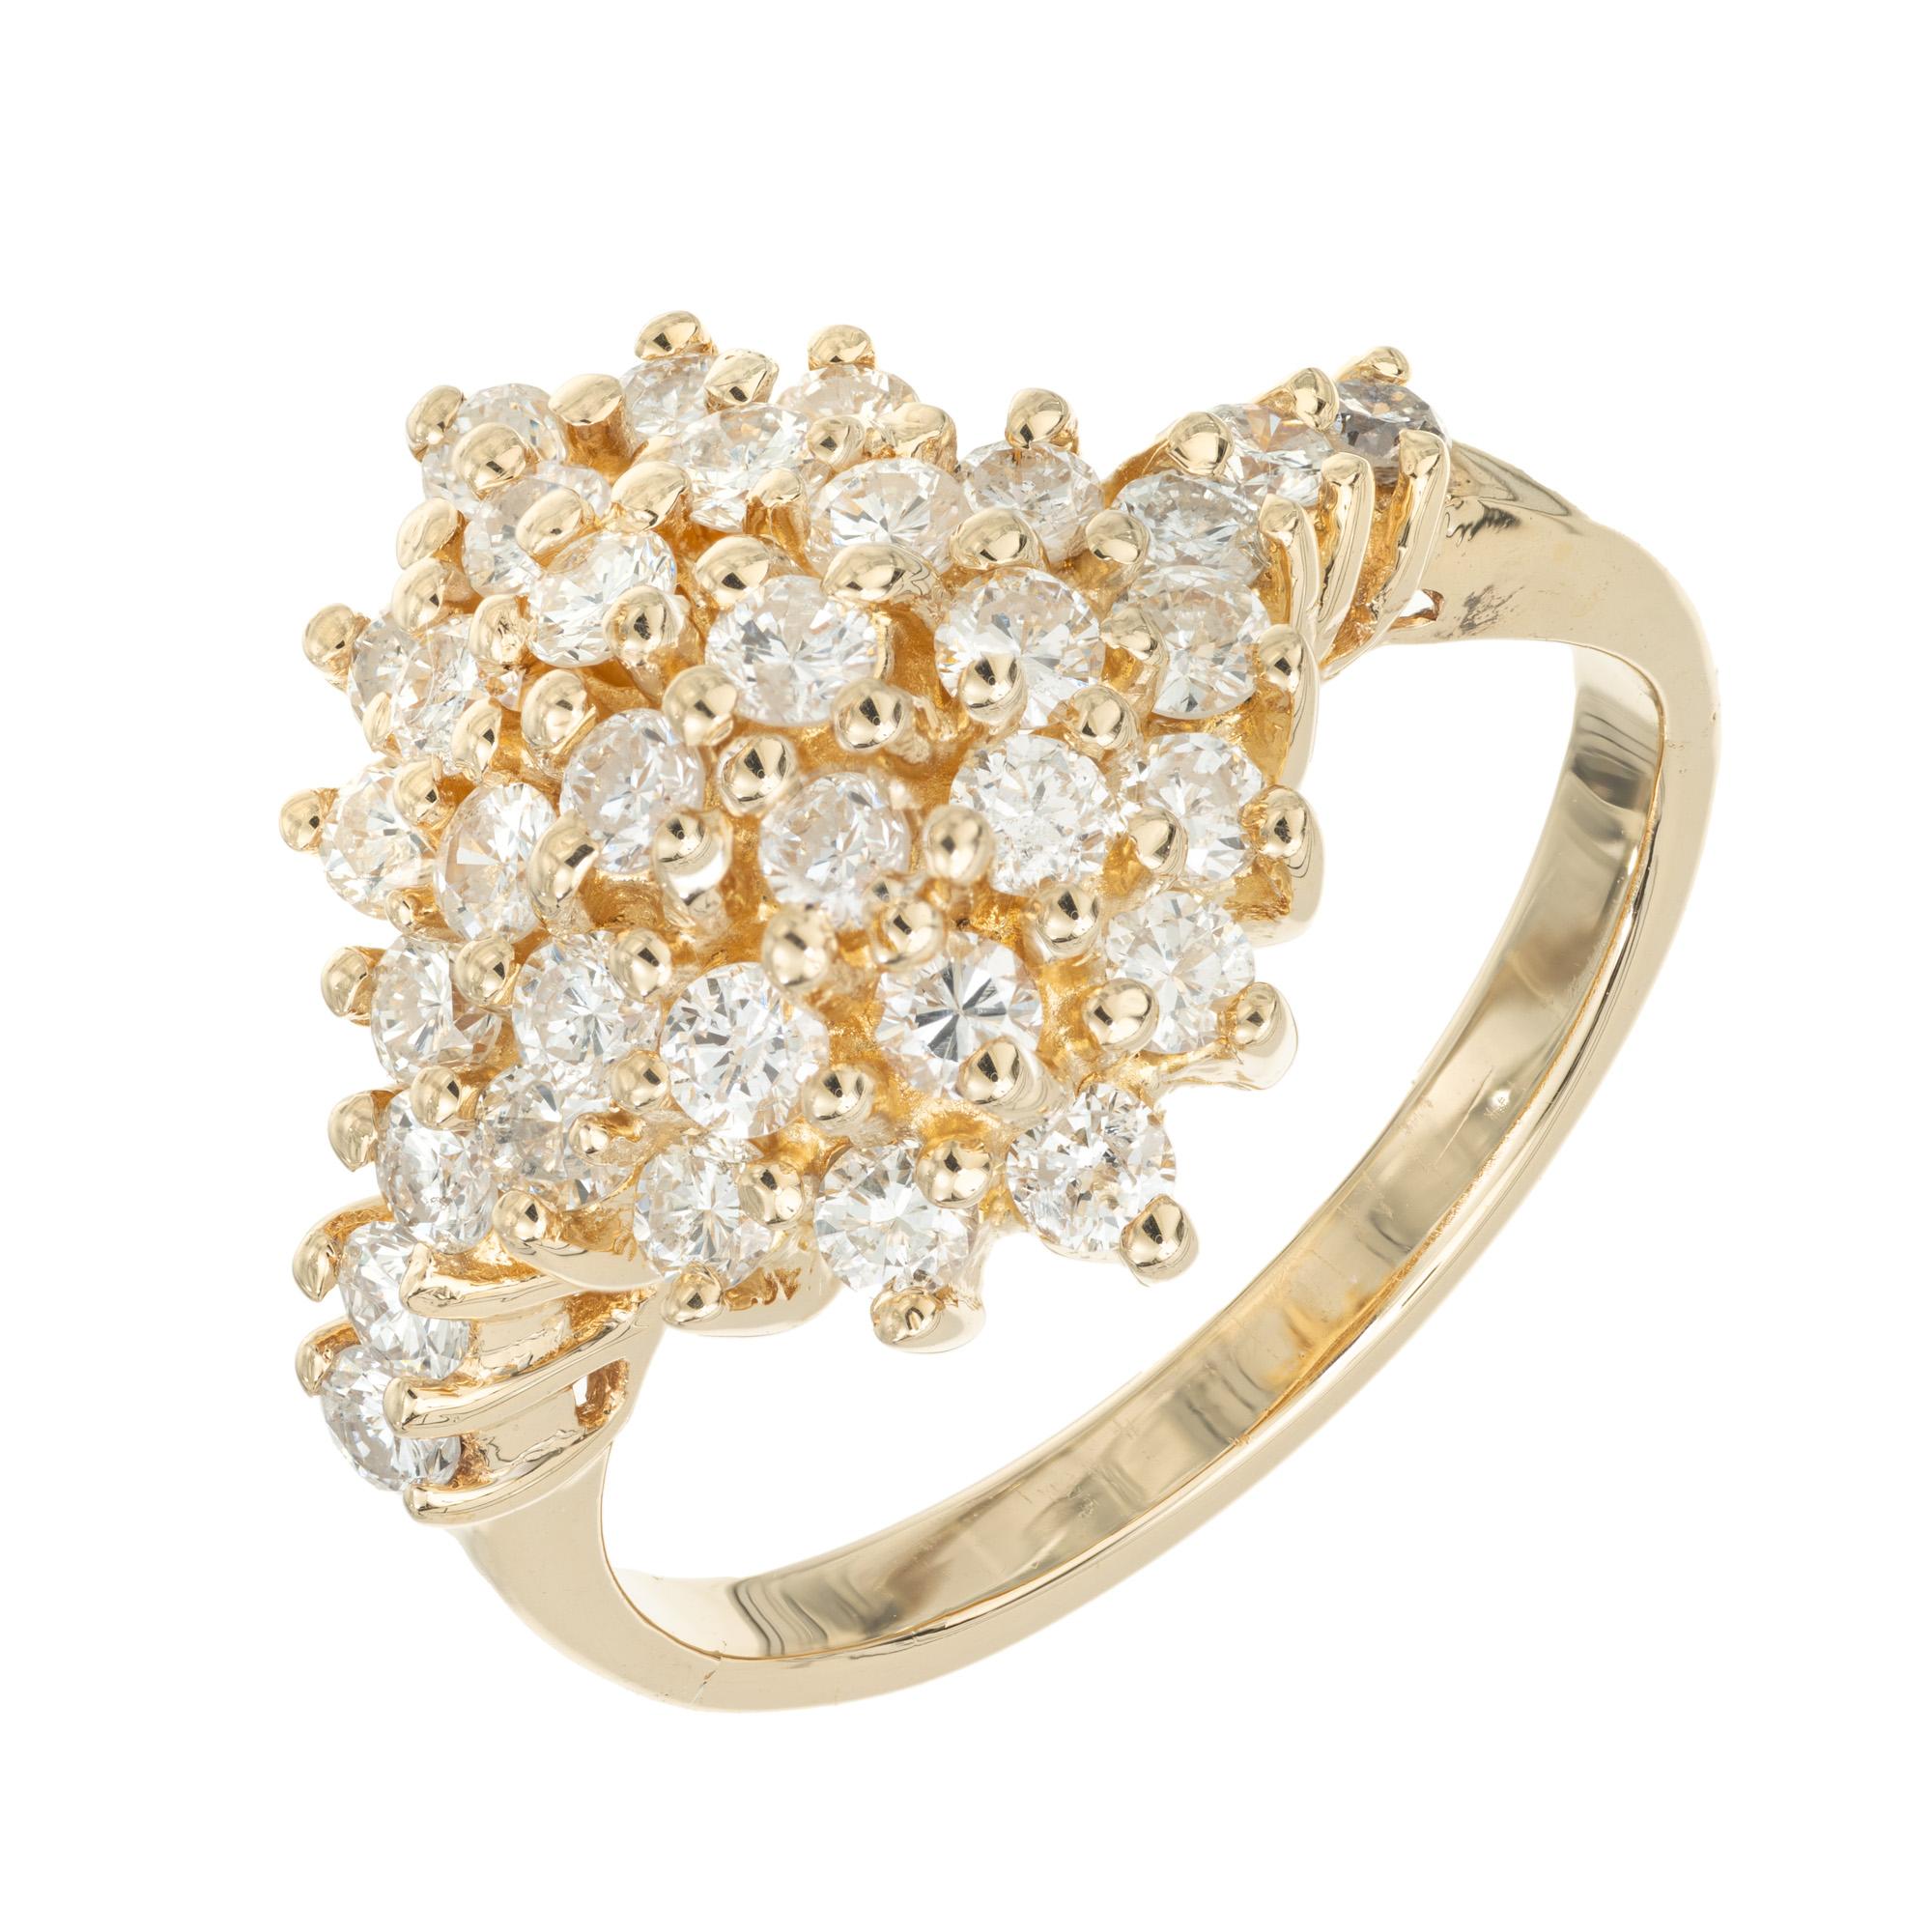 Diamond dome cluster ring. The ring is set with 32 round brilliant cut diamonds in a cluster design. The domed setting is crafted in 14k yellow gold and has diamonds long both shoulders. The total weight of all the diamonds combined is approximately